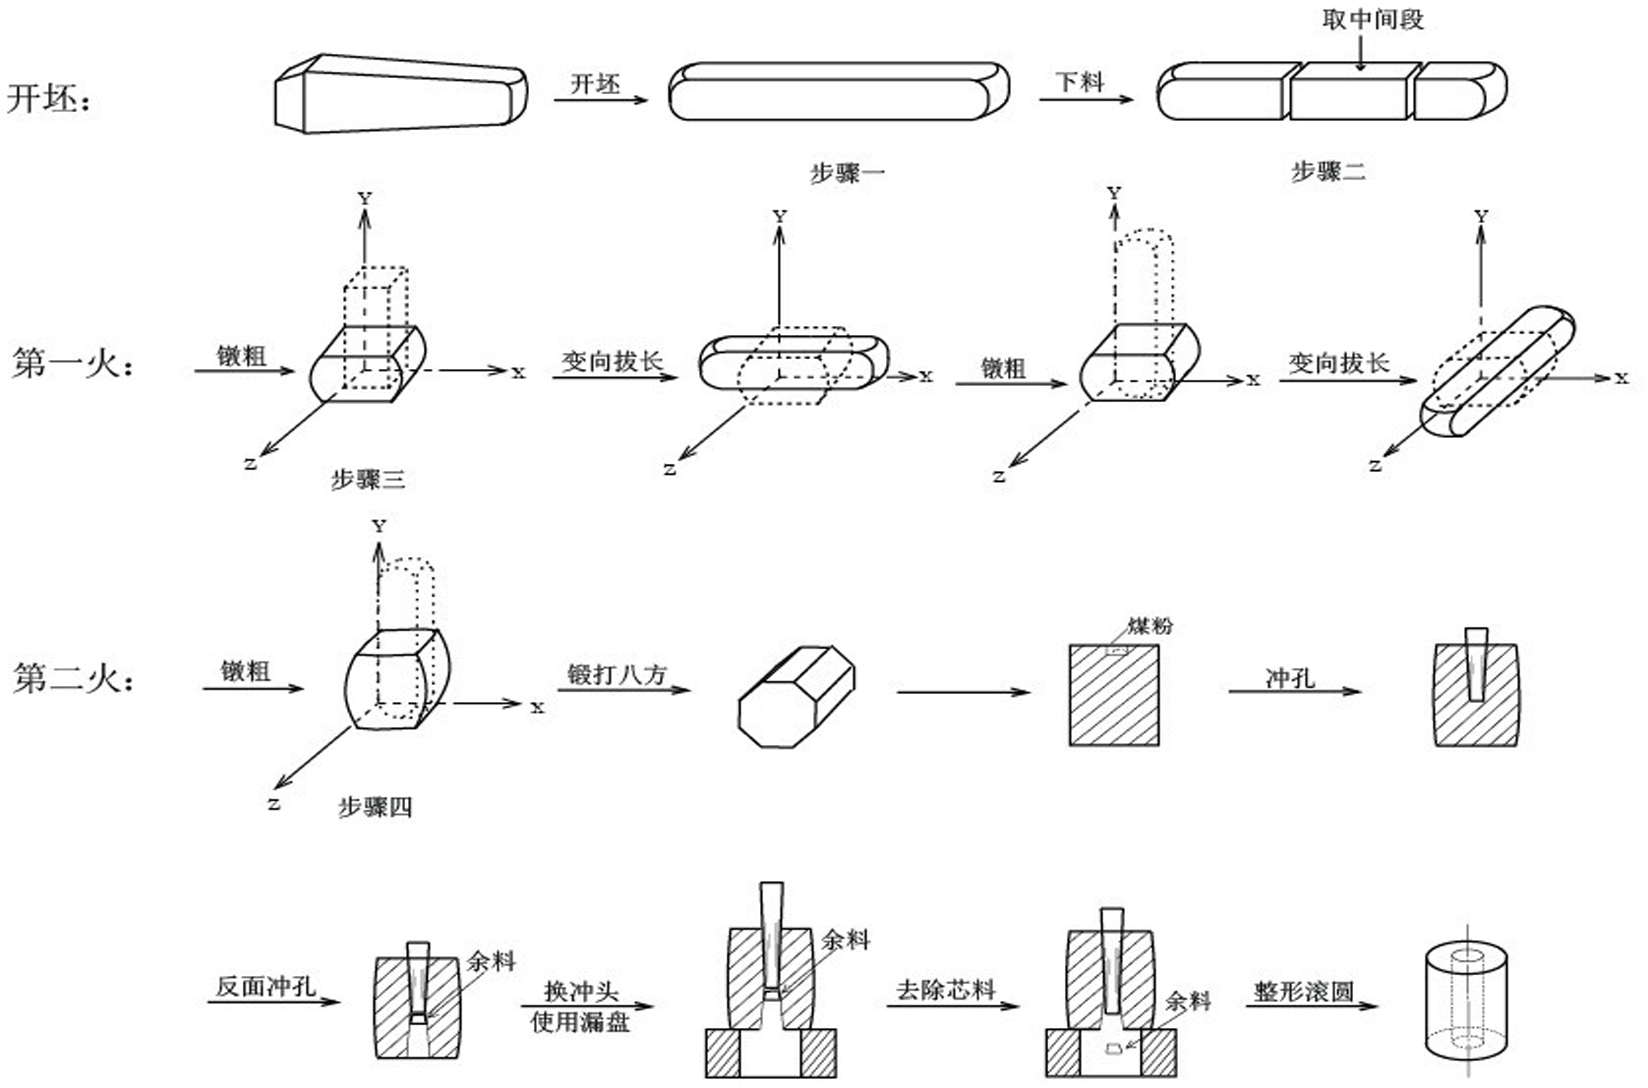 Steel forging manufacturing process for deep-sea Christmas tree equipment connectors